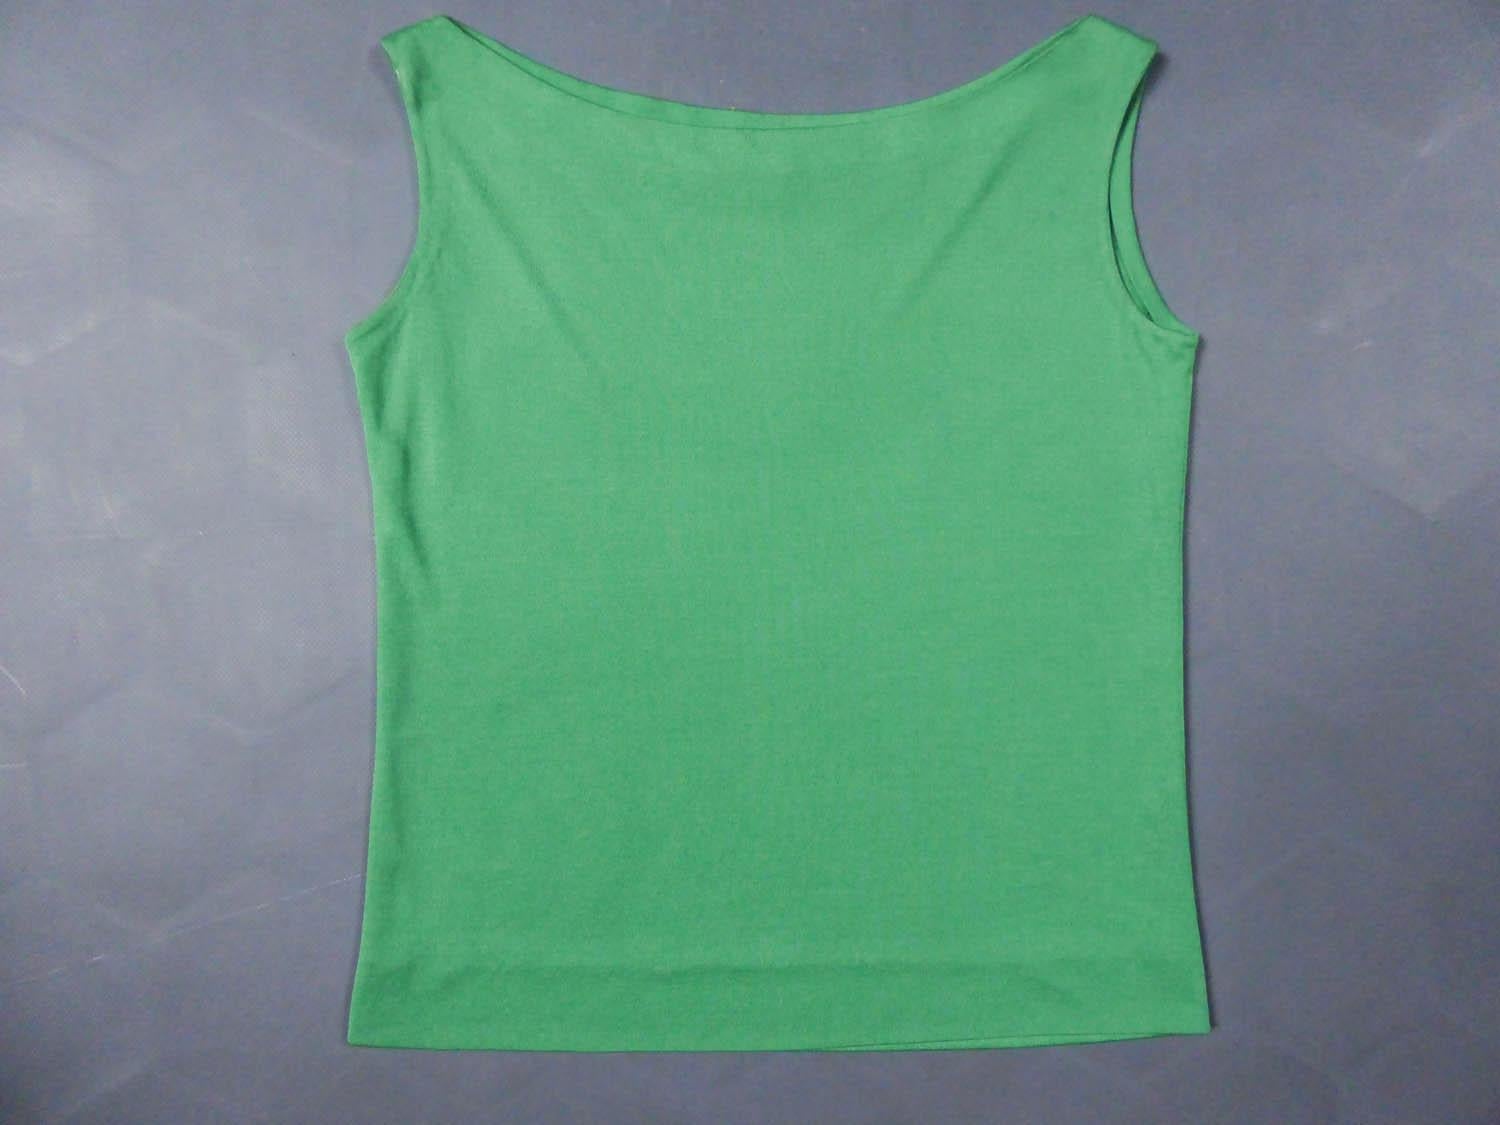 Circa 1960
Italie

Emilio Pucci top or tank top with a fluid cut and a boat neck in green silk jersey. Elegance and minimalism of the fashion designer Emilio Pucci at its beginning. Label white background green graphic Emilio Pucci Lorence Italy